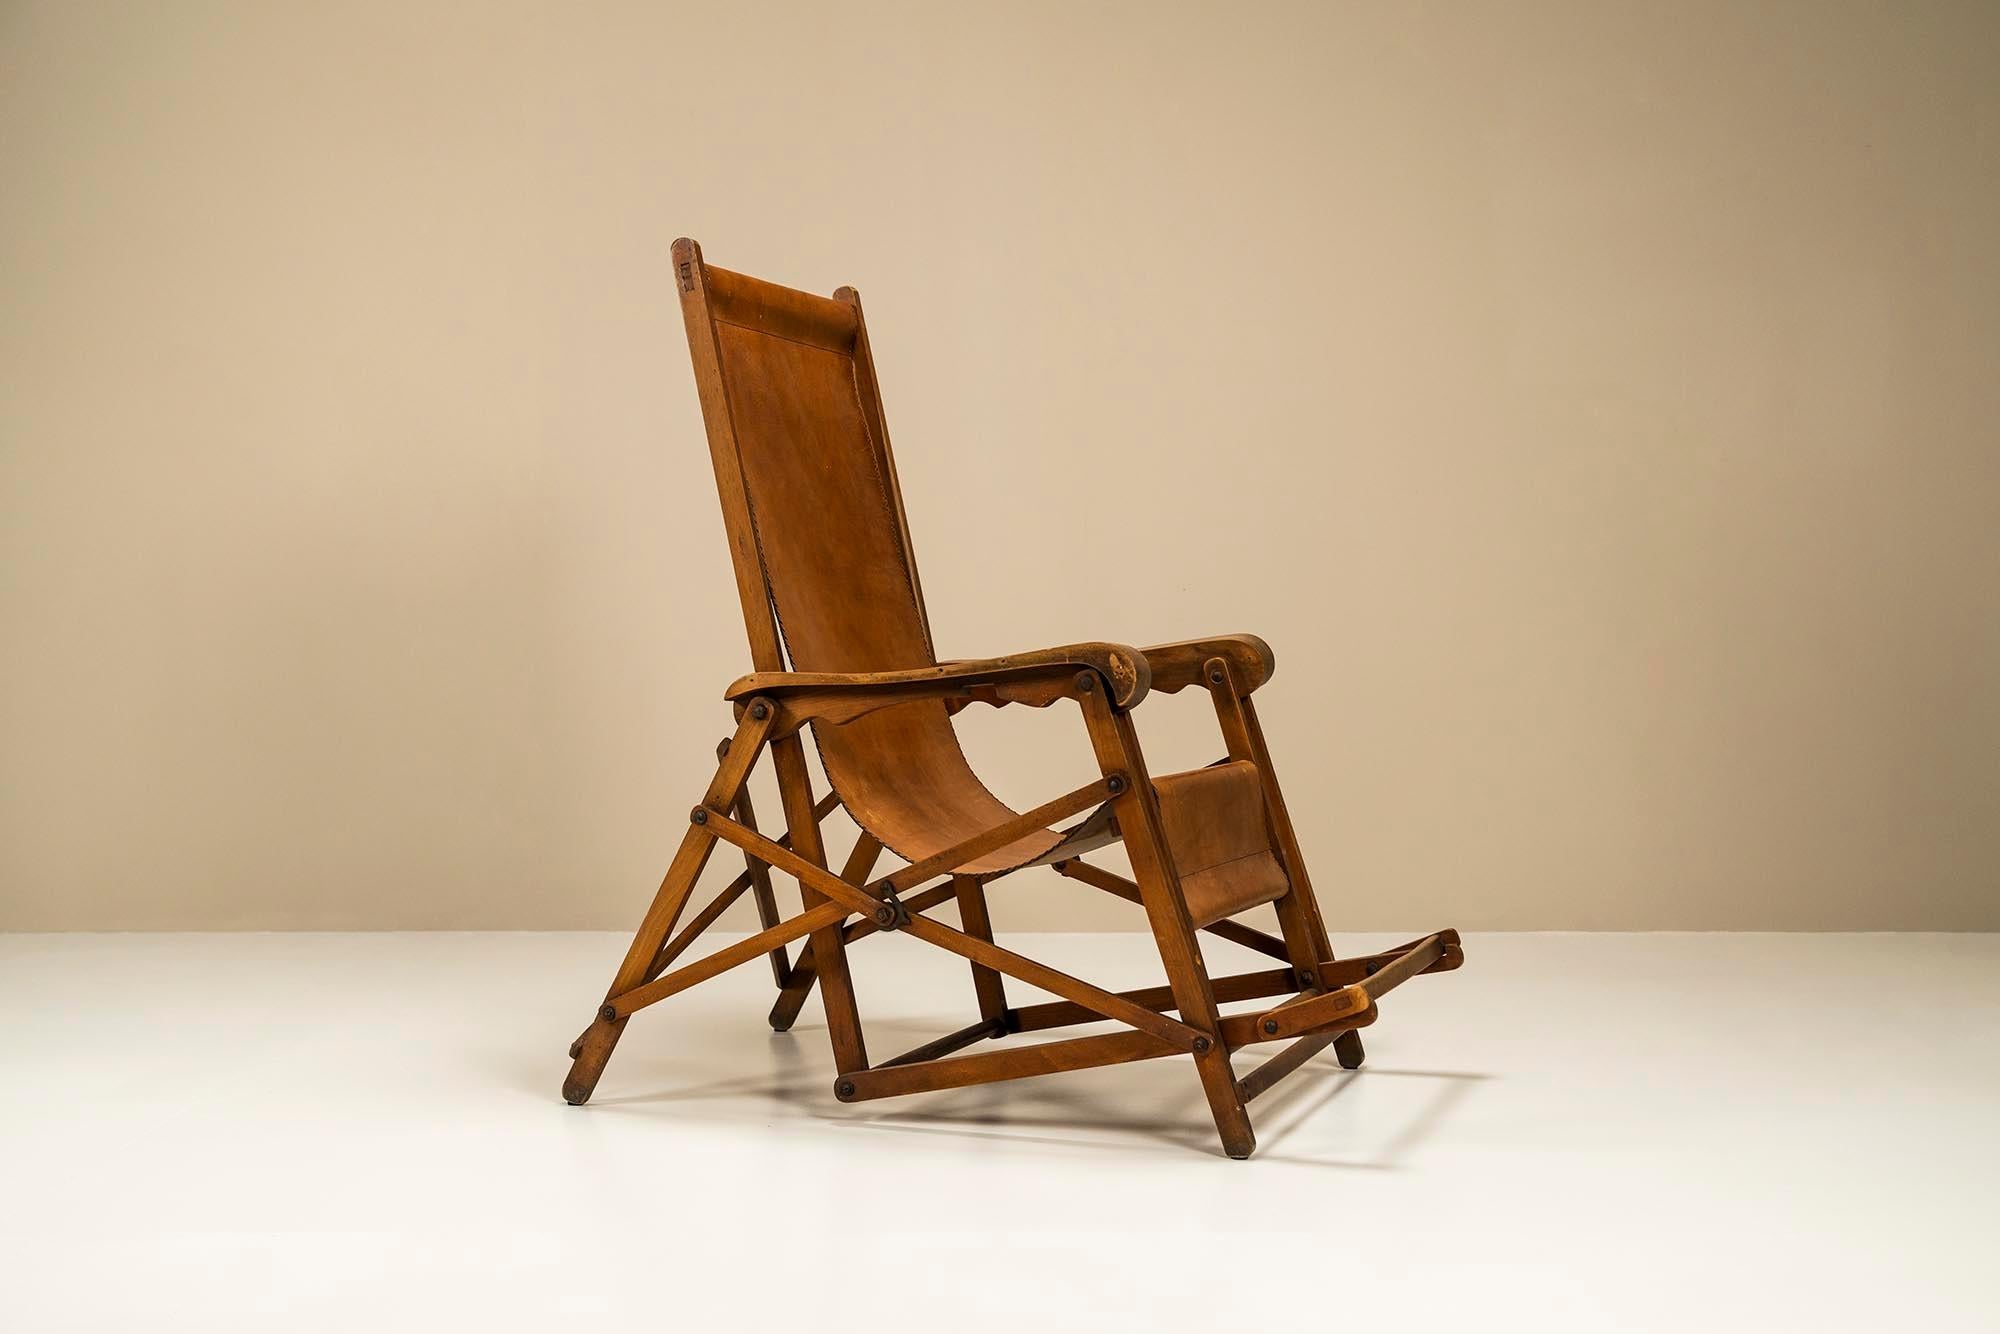 A deck chair, designed in 1938 by Fratelli Reguitti in collaboration with Louis Vuitton, is a true masterpiece of craftsmanship and design. This chair is a perfect example of the exceptional quality and attention to detail that characterized the